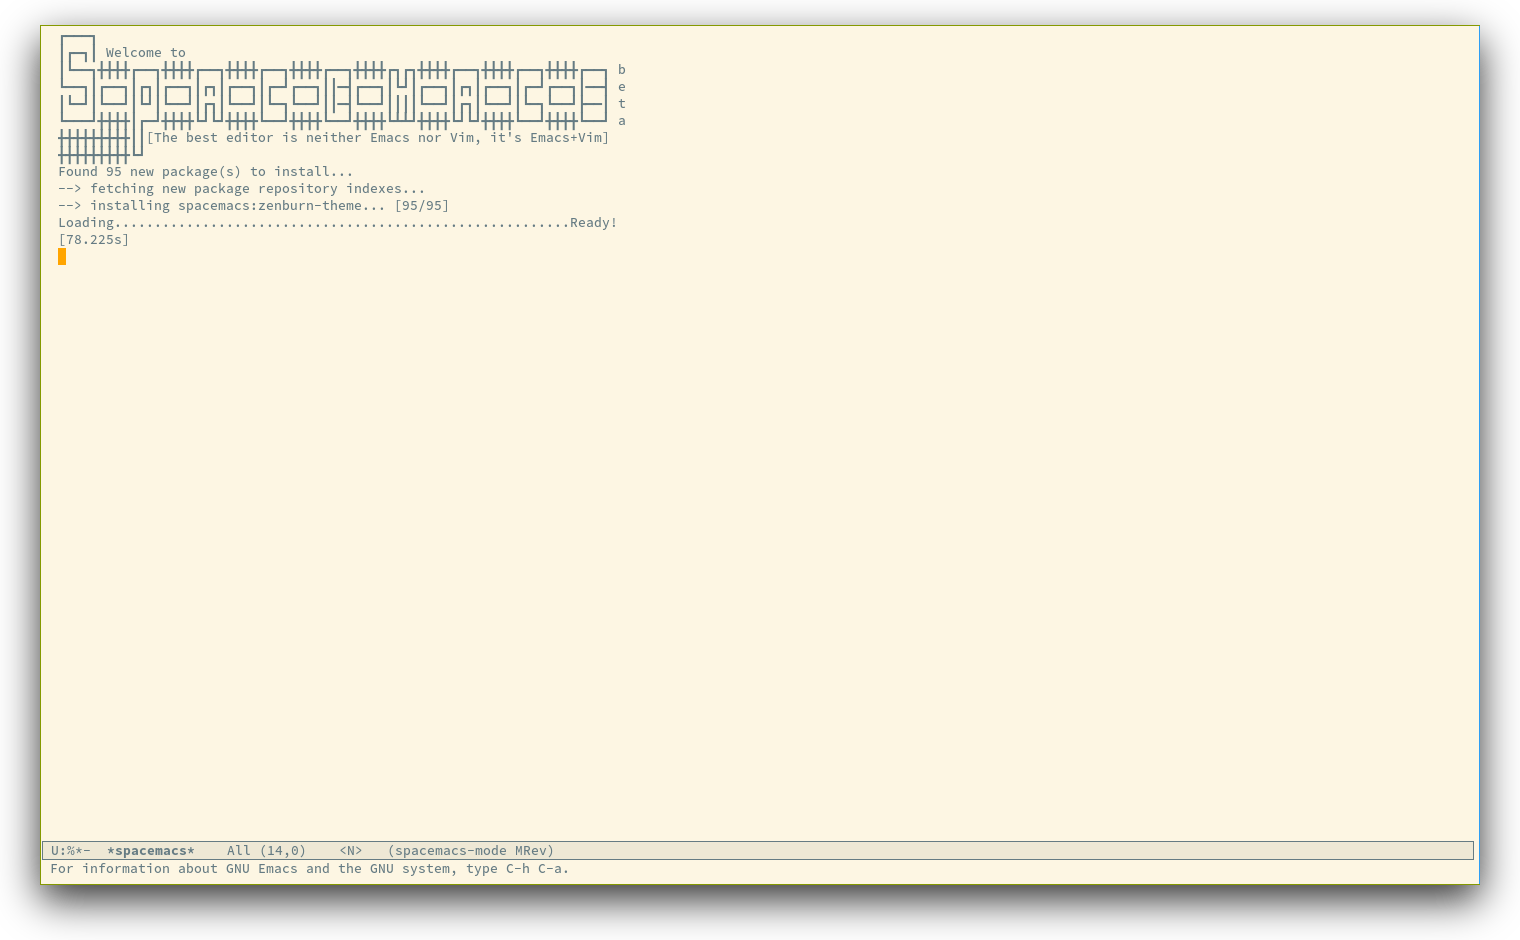 /TakeV/spacemacs/media/commit/374e37e32c71295aec87d8207380e9ab019b5ba3/doc/img/spacemacs-startup.png